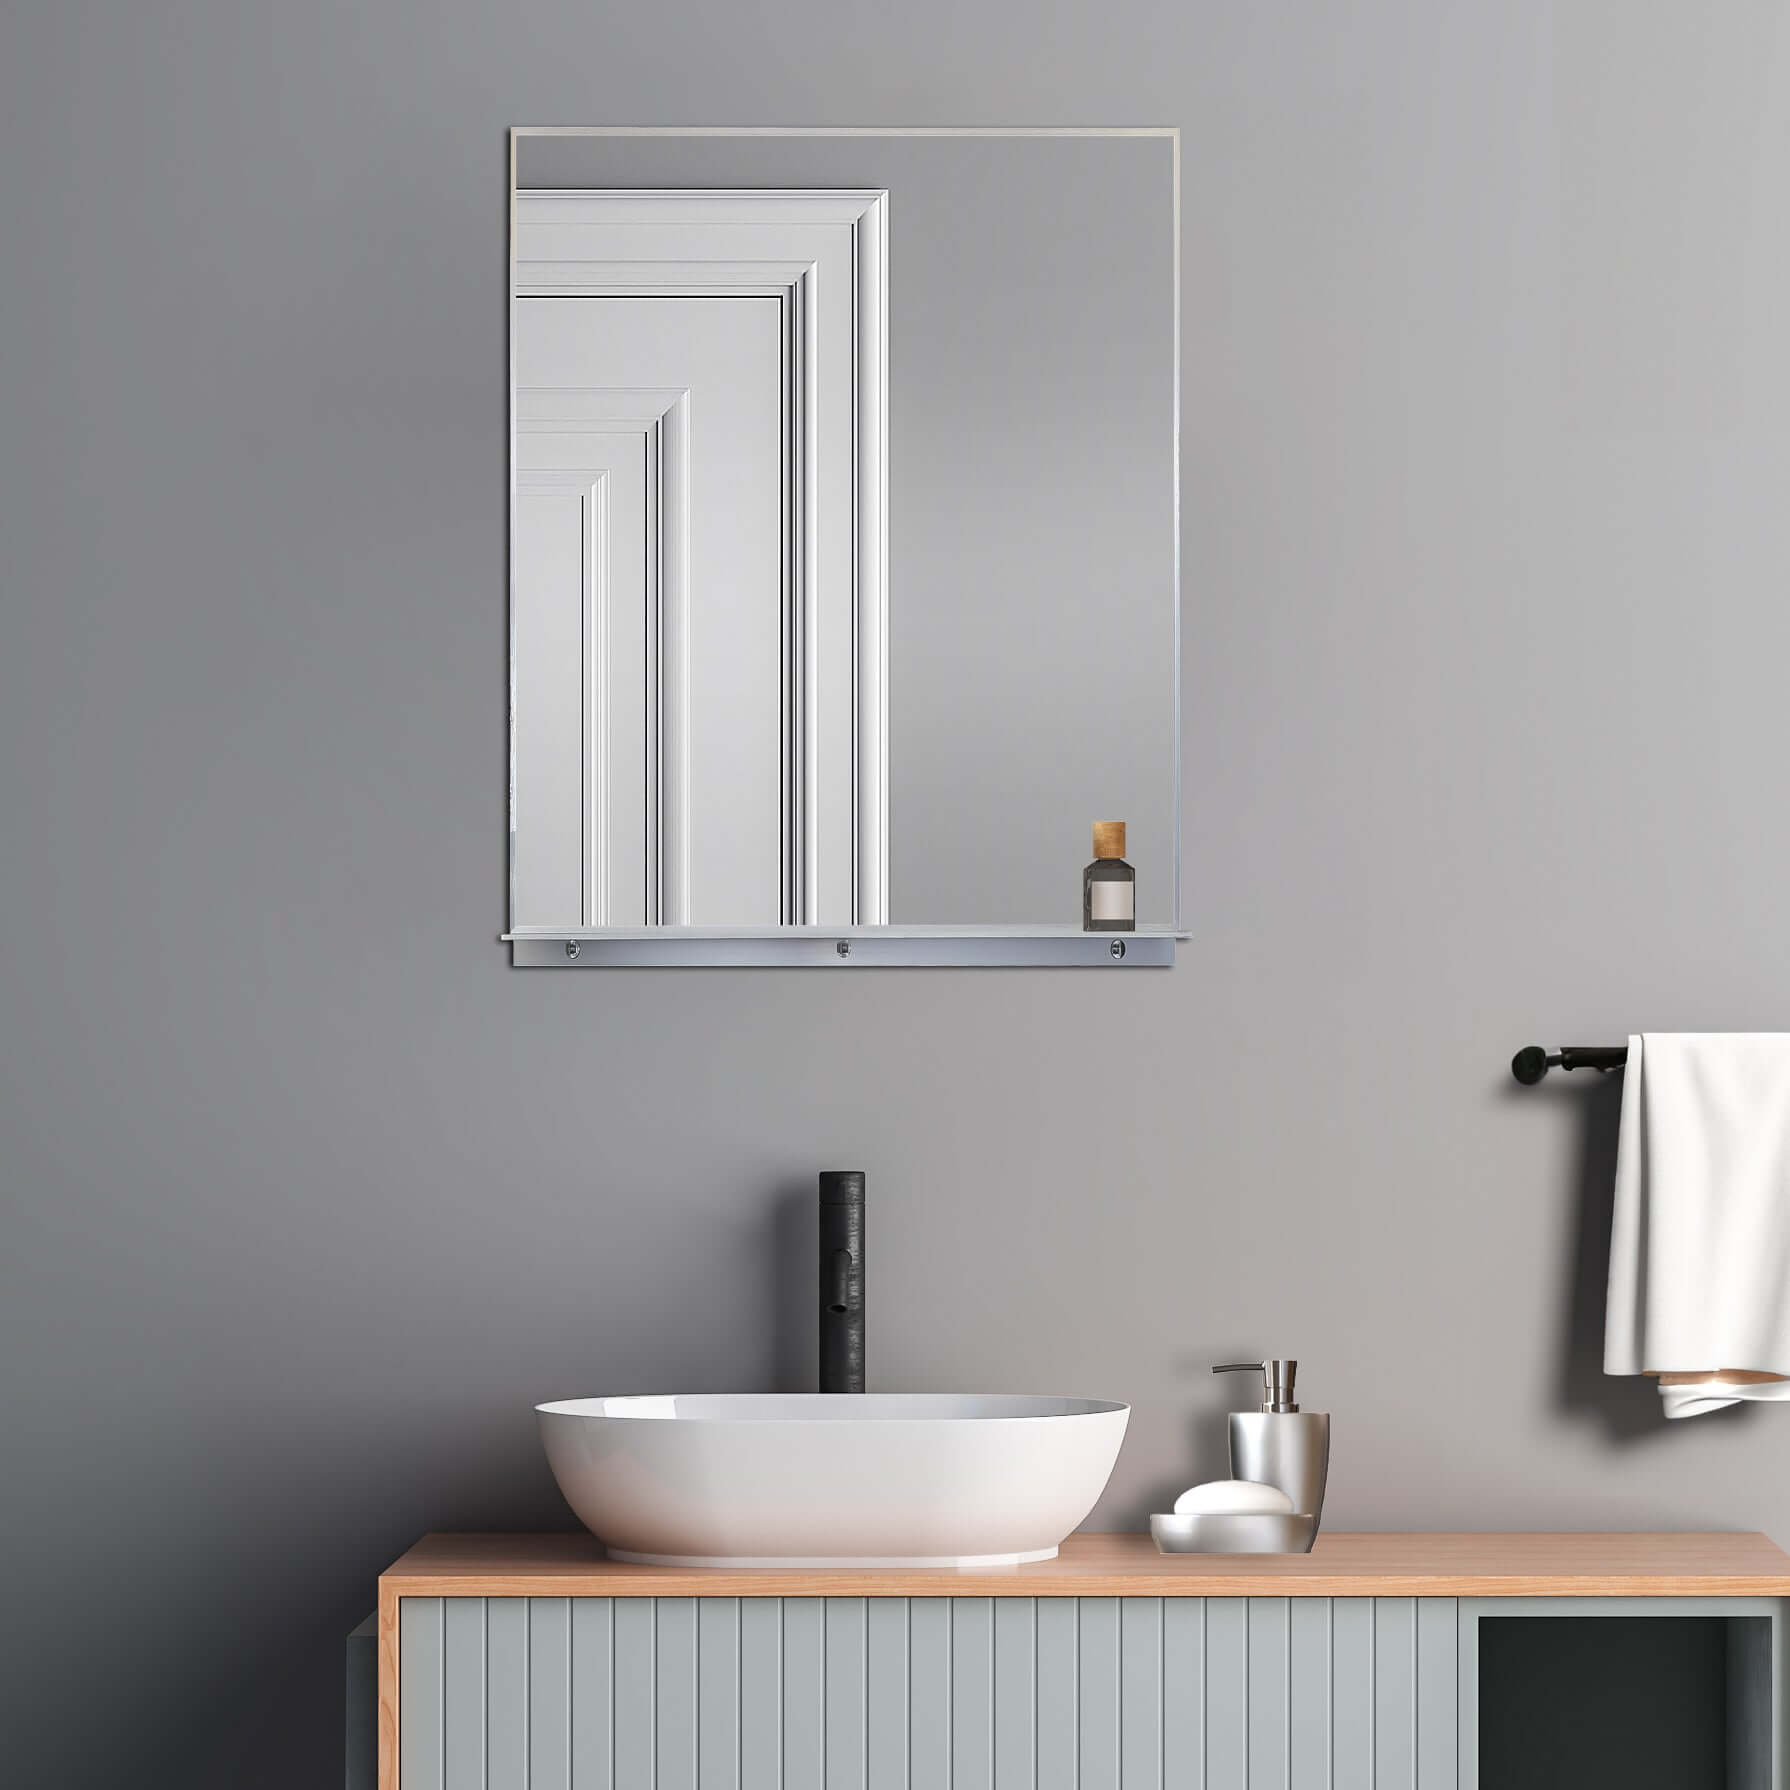 Lexi 24"W x 32"H Rectangular Framed Mirror with Integrated Shelf in Brushed Nickel - Dreamwerks